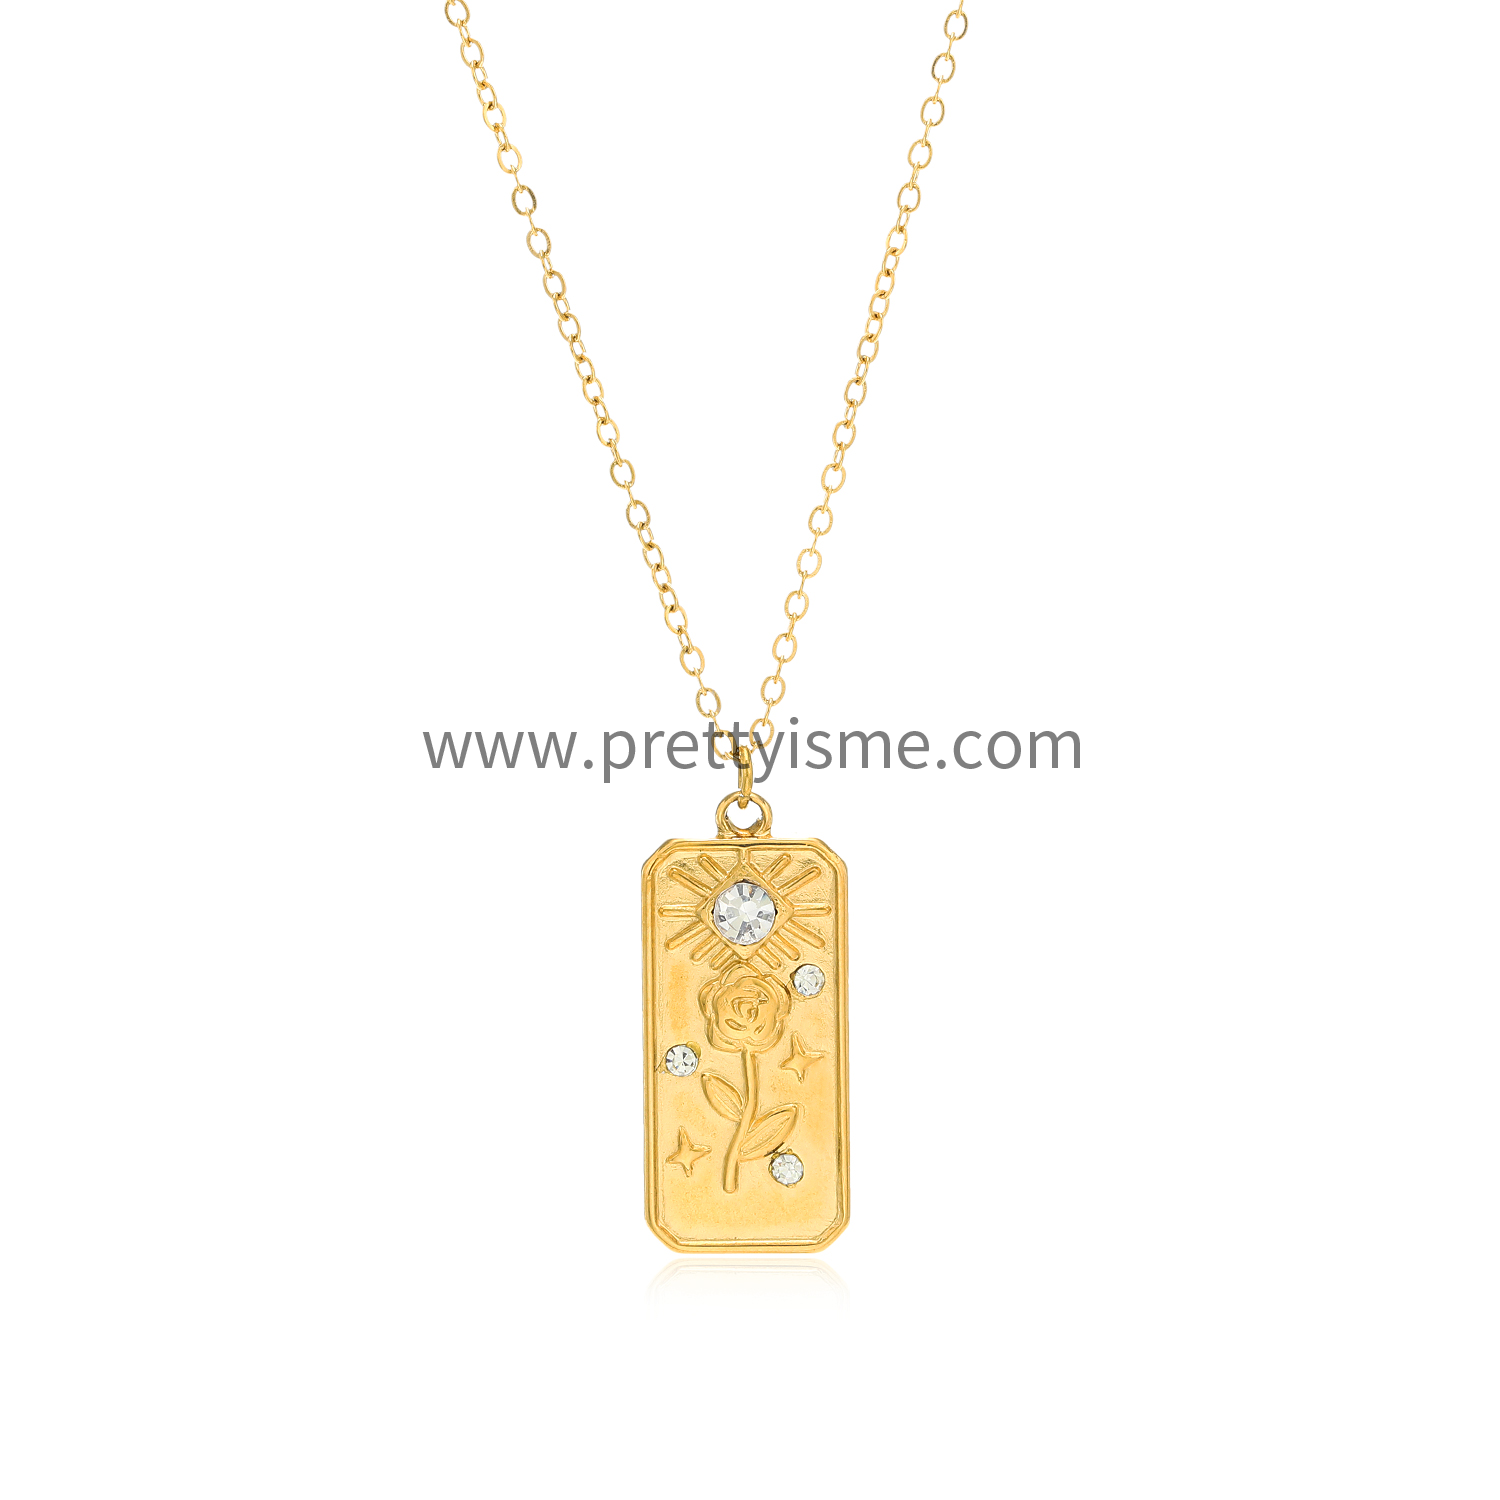 Thin Necklace Gold Plated 18K with Square Pendant Everyday Rose Pattern with Sparkling Diamonds (5).webp